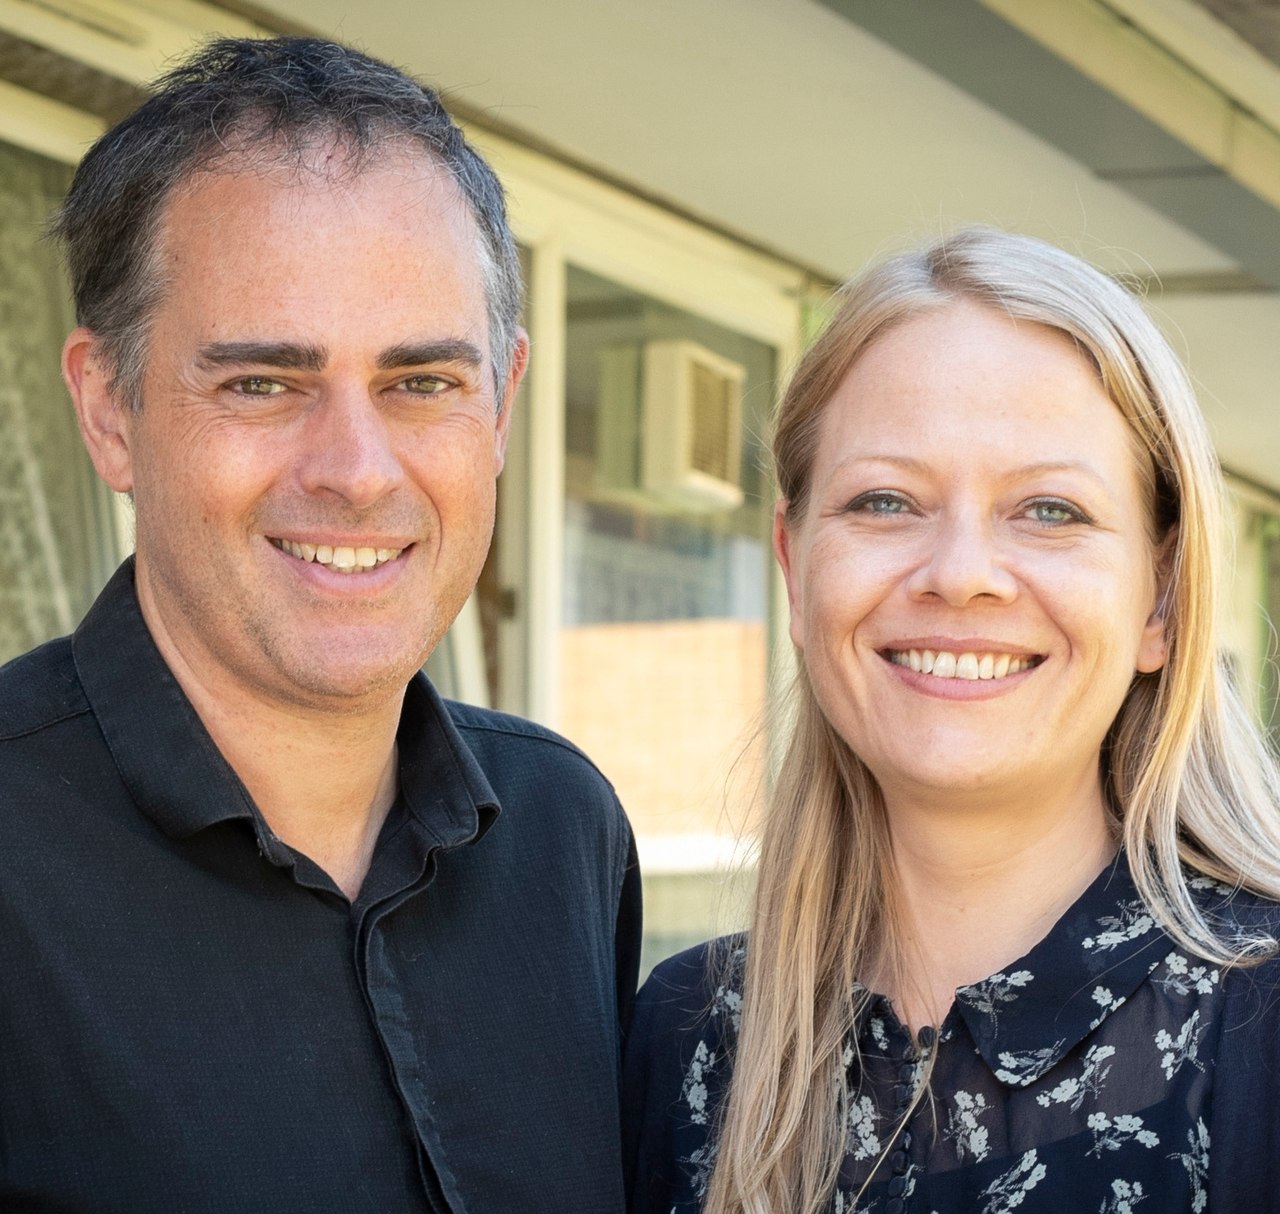 Jonathan Bartley and Sian Berry, Green Party co-leaders